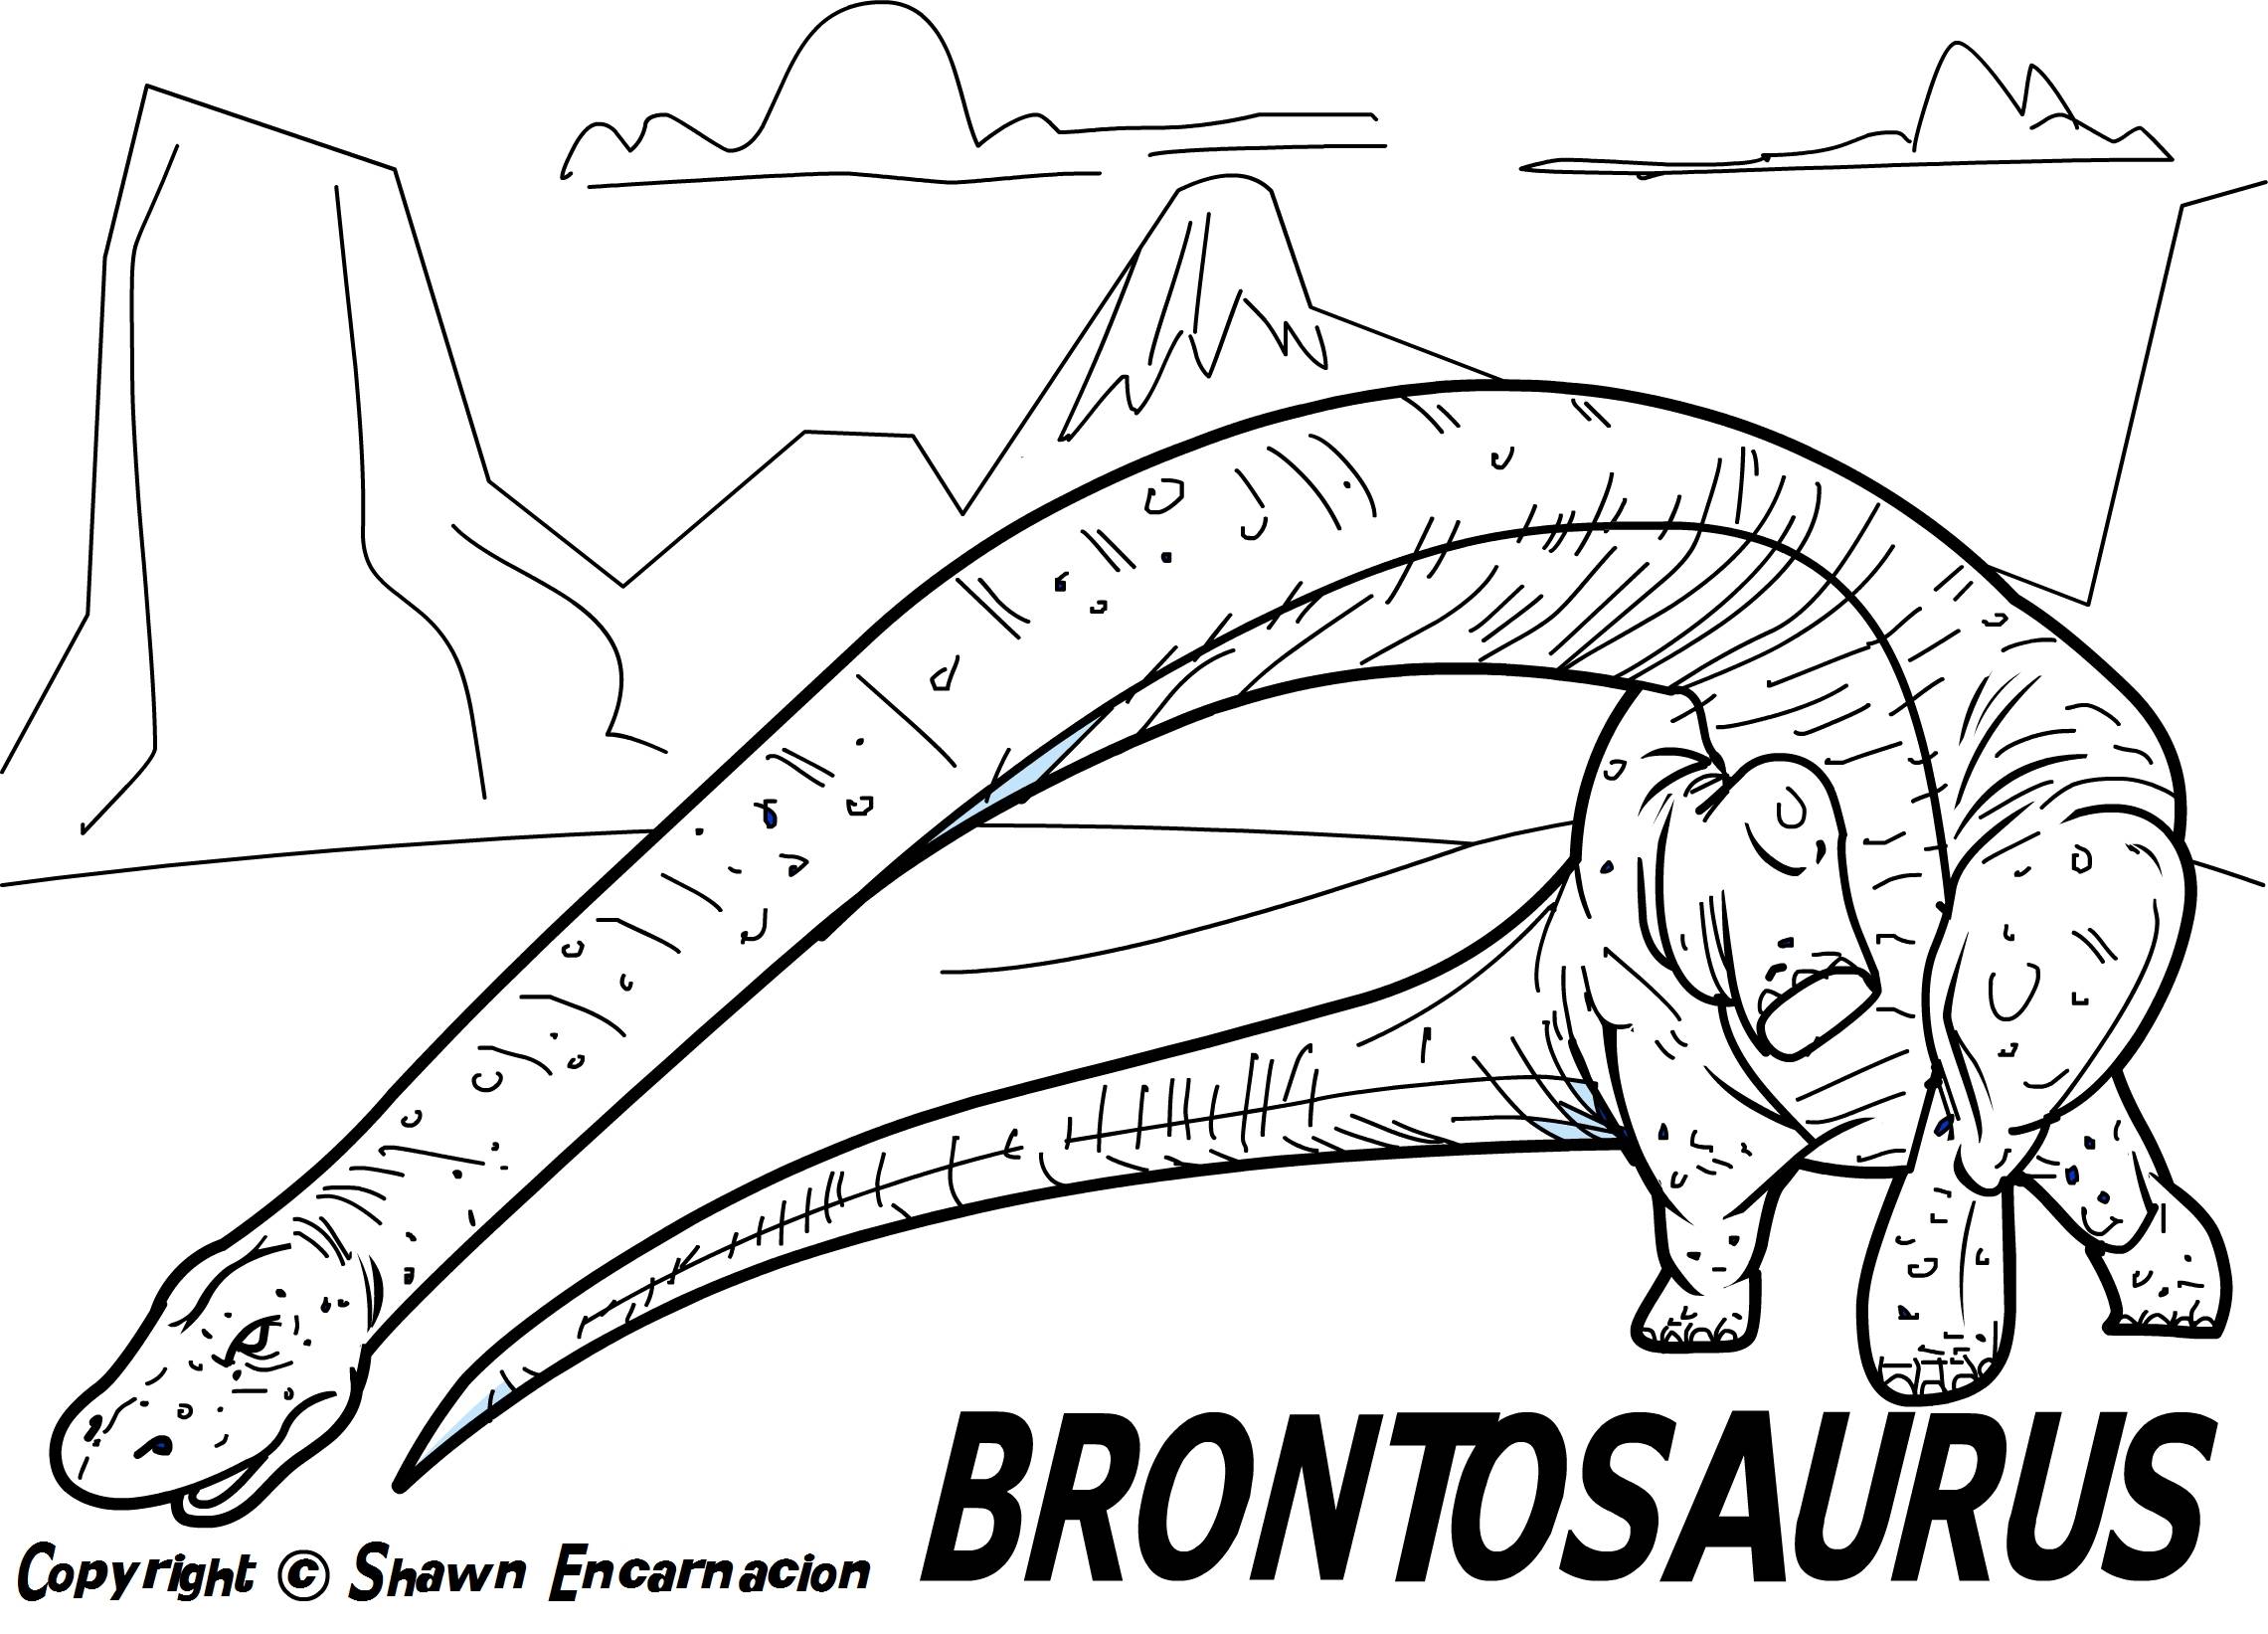 Terrible Lizards Dinosaurs coloring pages 17 Pictures and ...